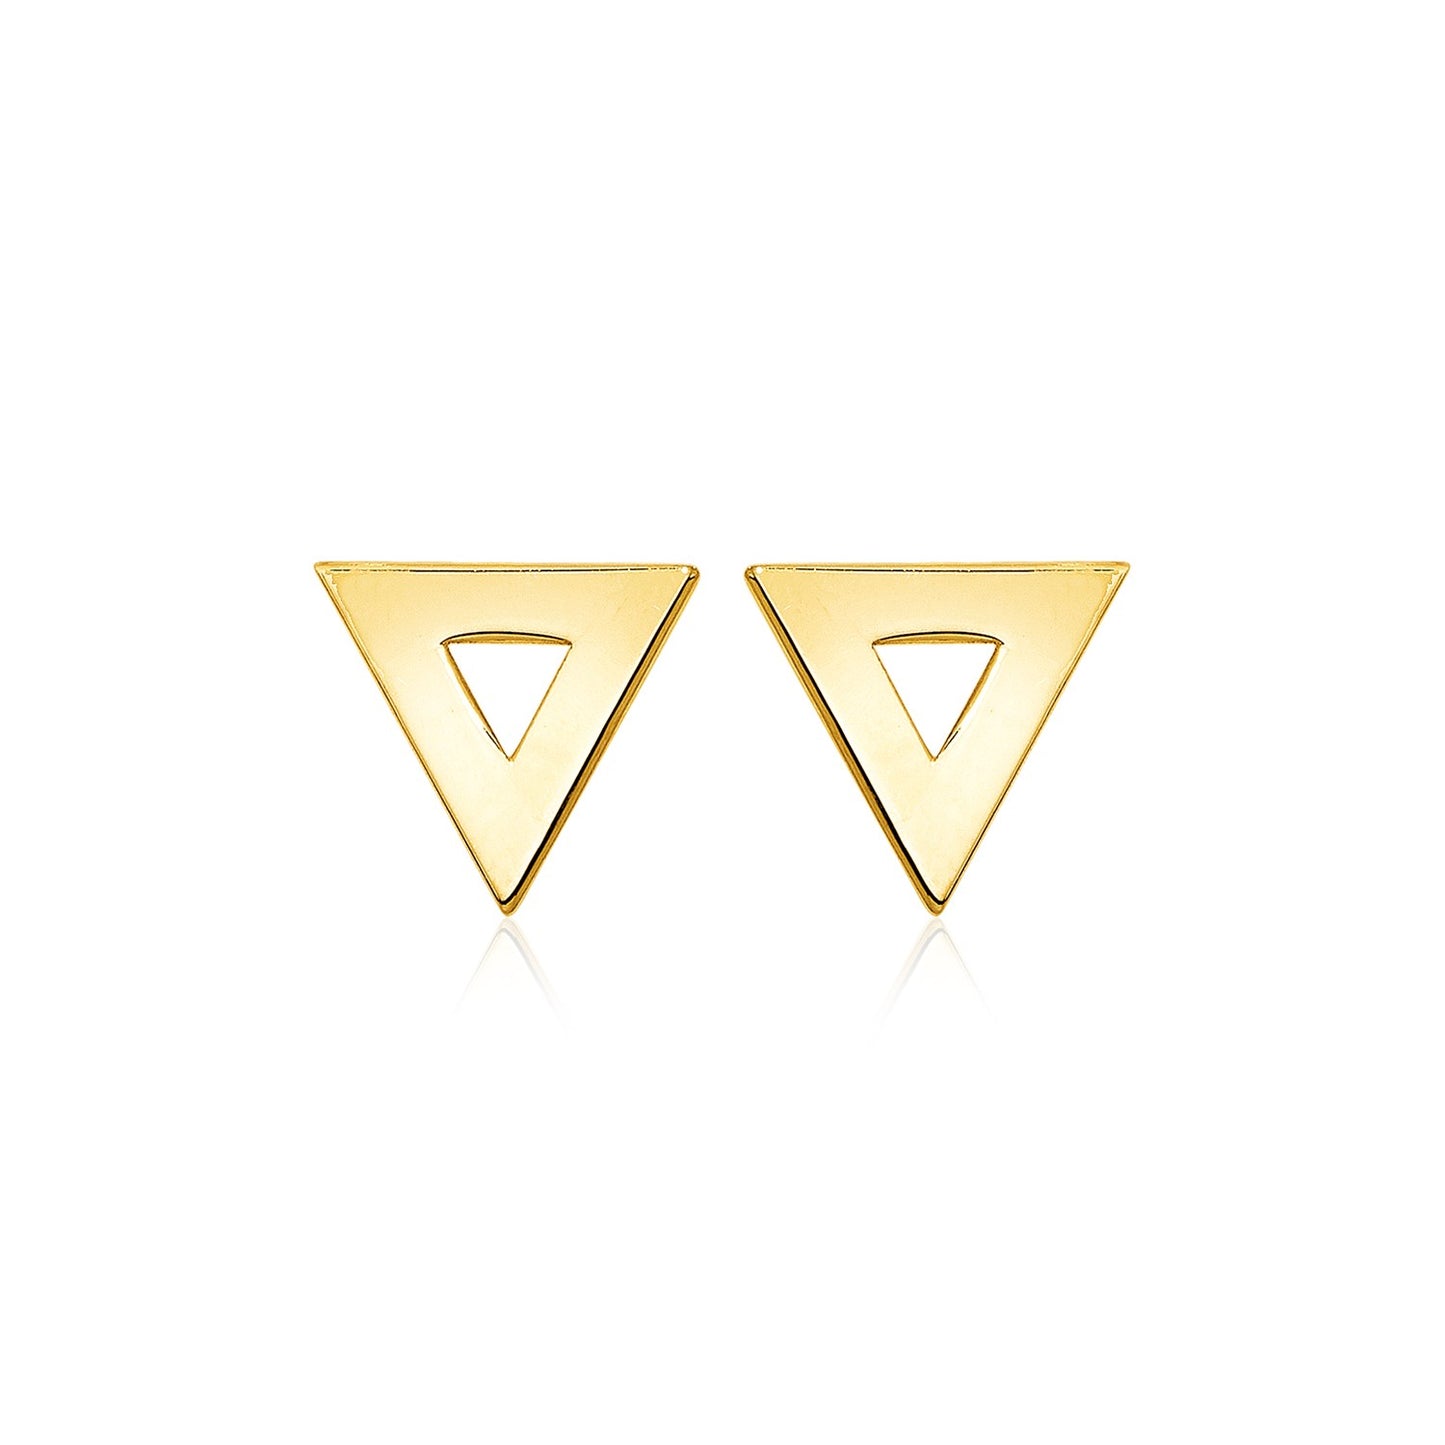 14k Yellow Gold Polished Open Triangle Post Earrings